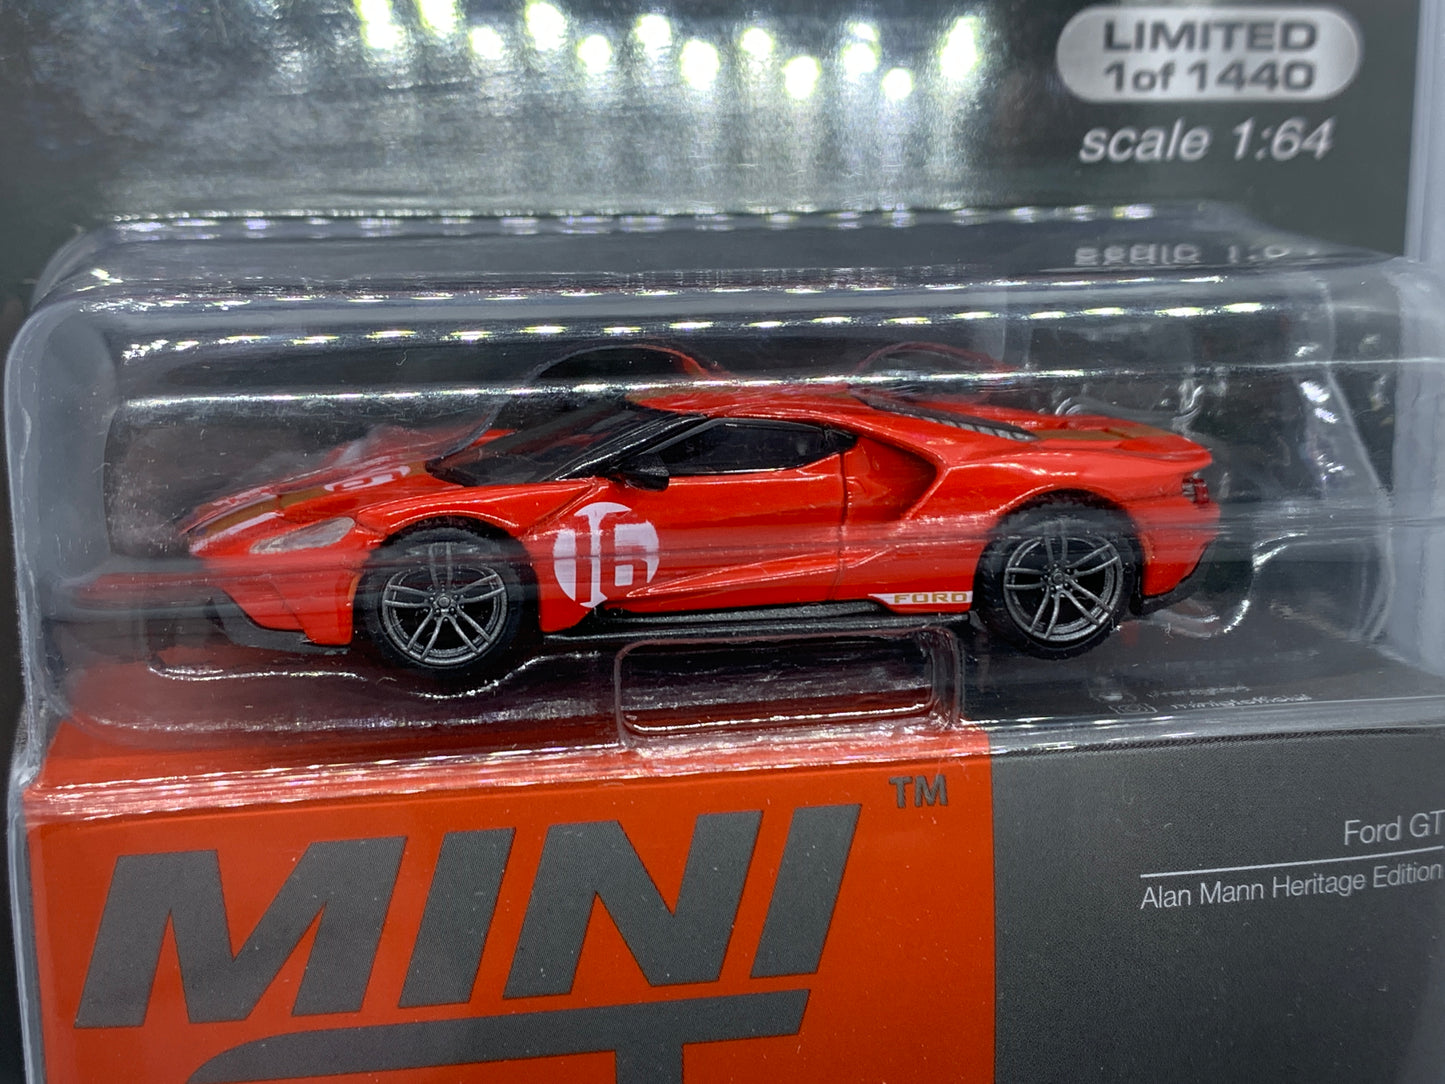 MINI GT - Ford GT Alan Mann Heritage Ed - Display Blister Packaging